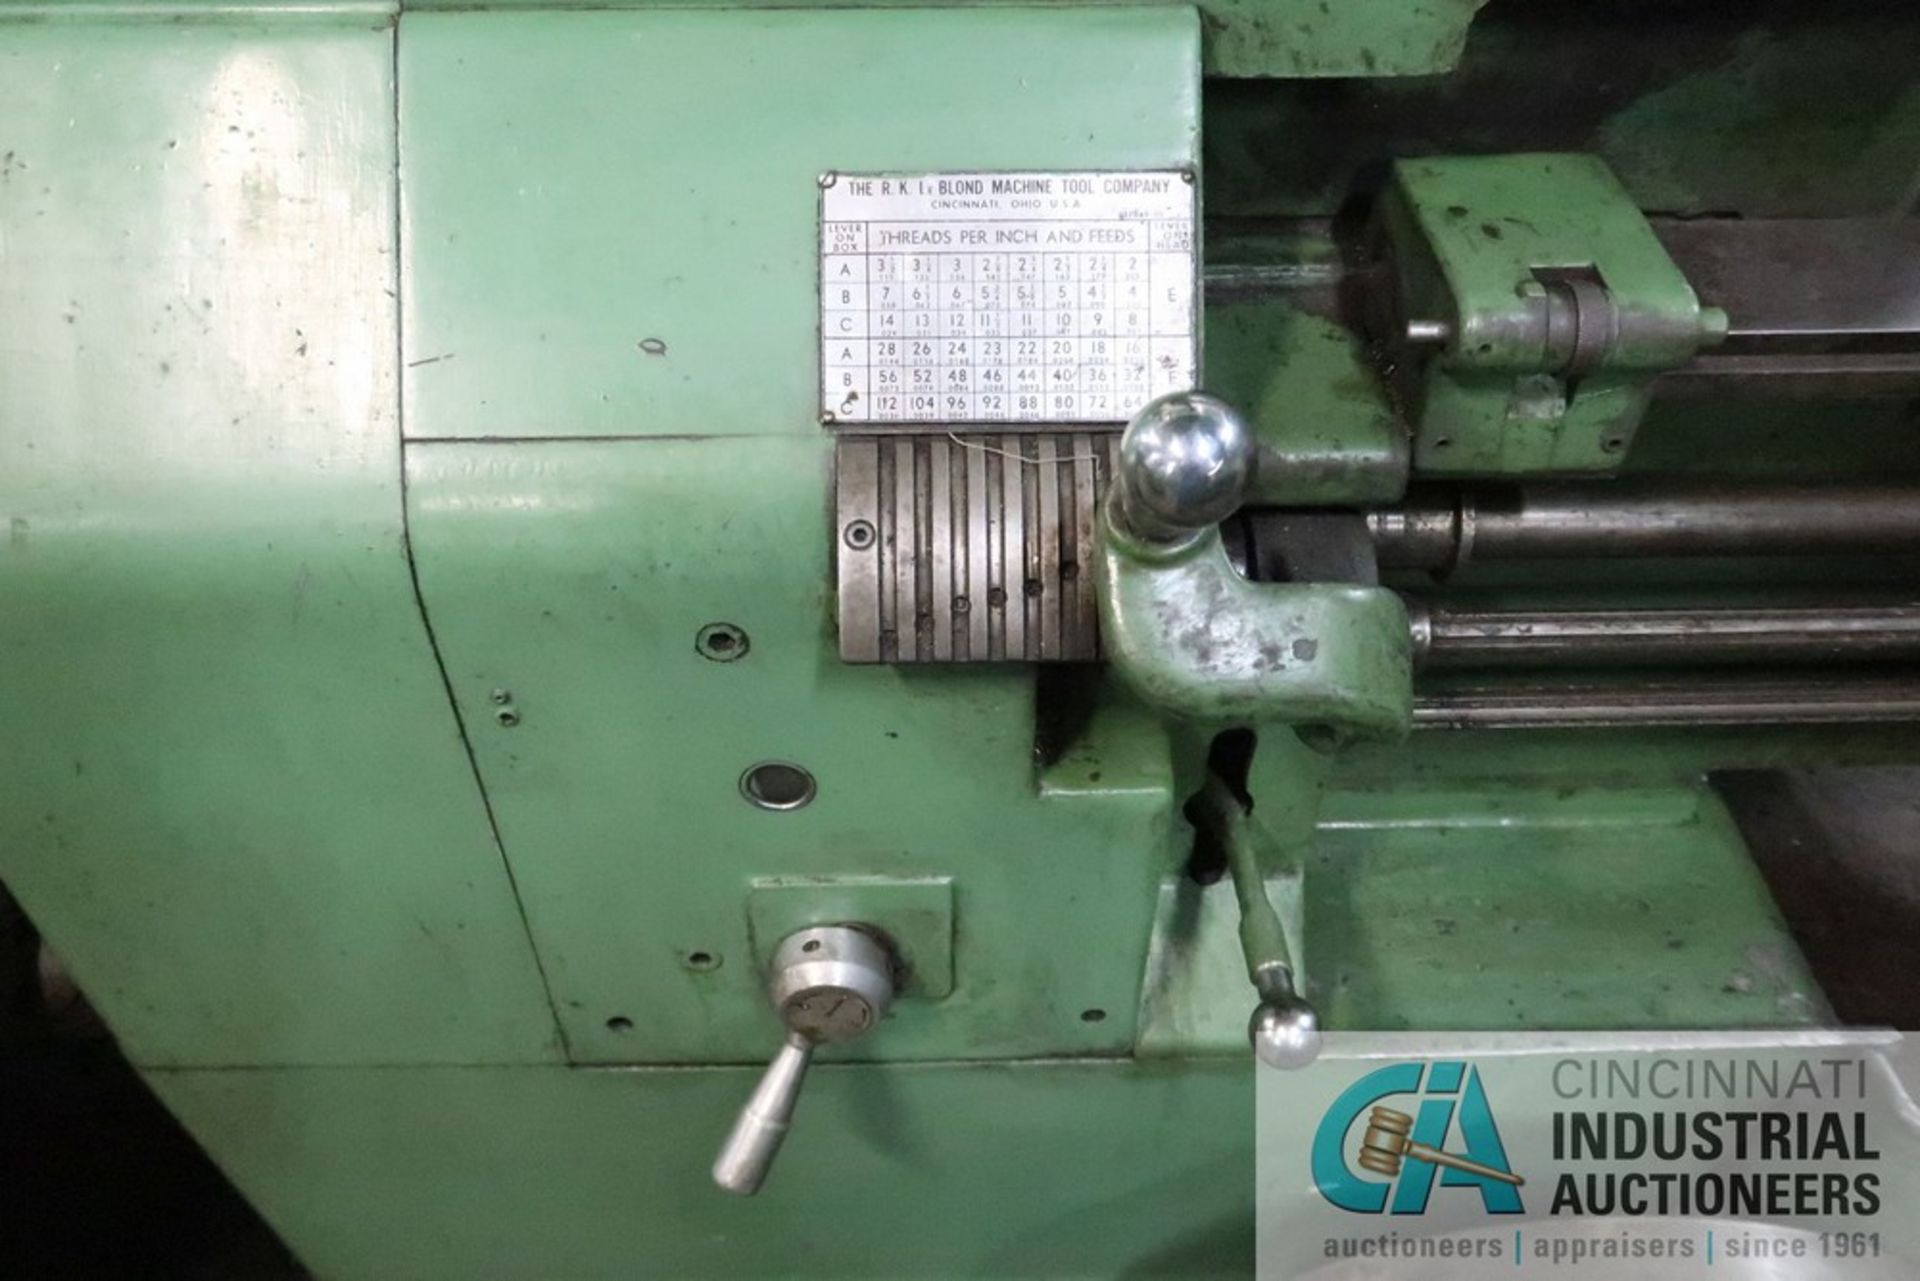 26" X 96" LEBLOND ENGINE LATHE; S/N 5H-555, 2" SPINDLE HOLE, 18" 4-JAW CHUCK, TAPER ATTACHMENT, - Image 7 of 15